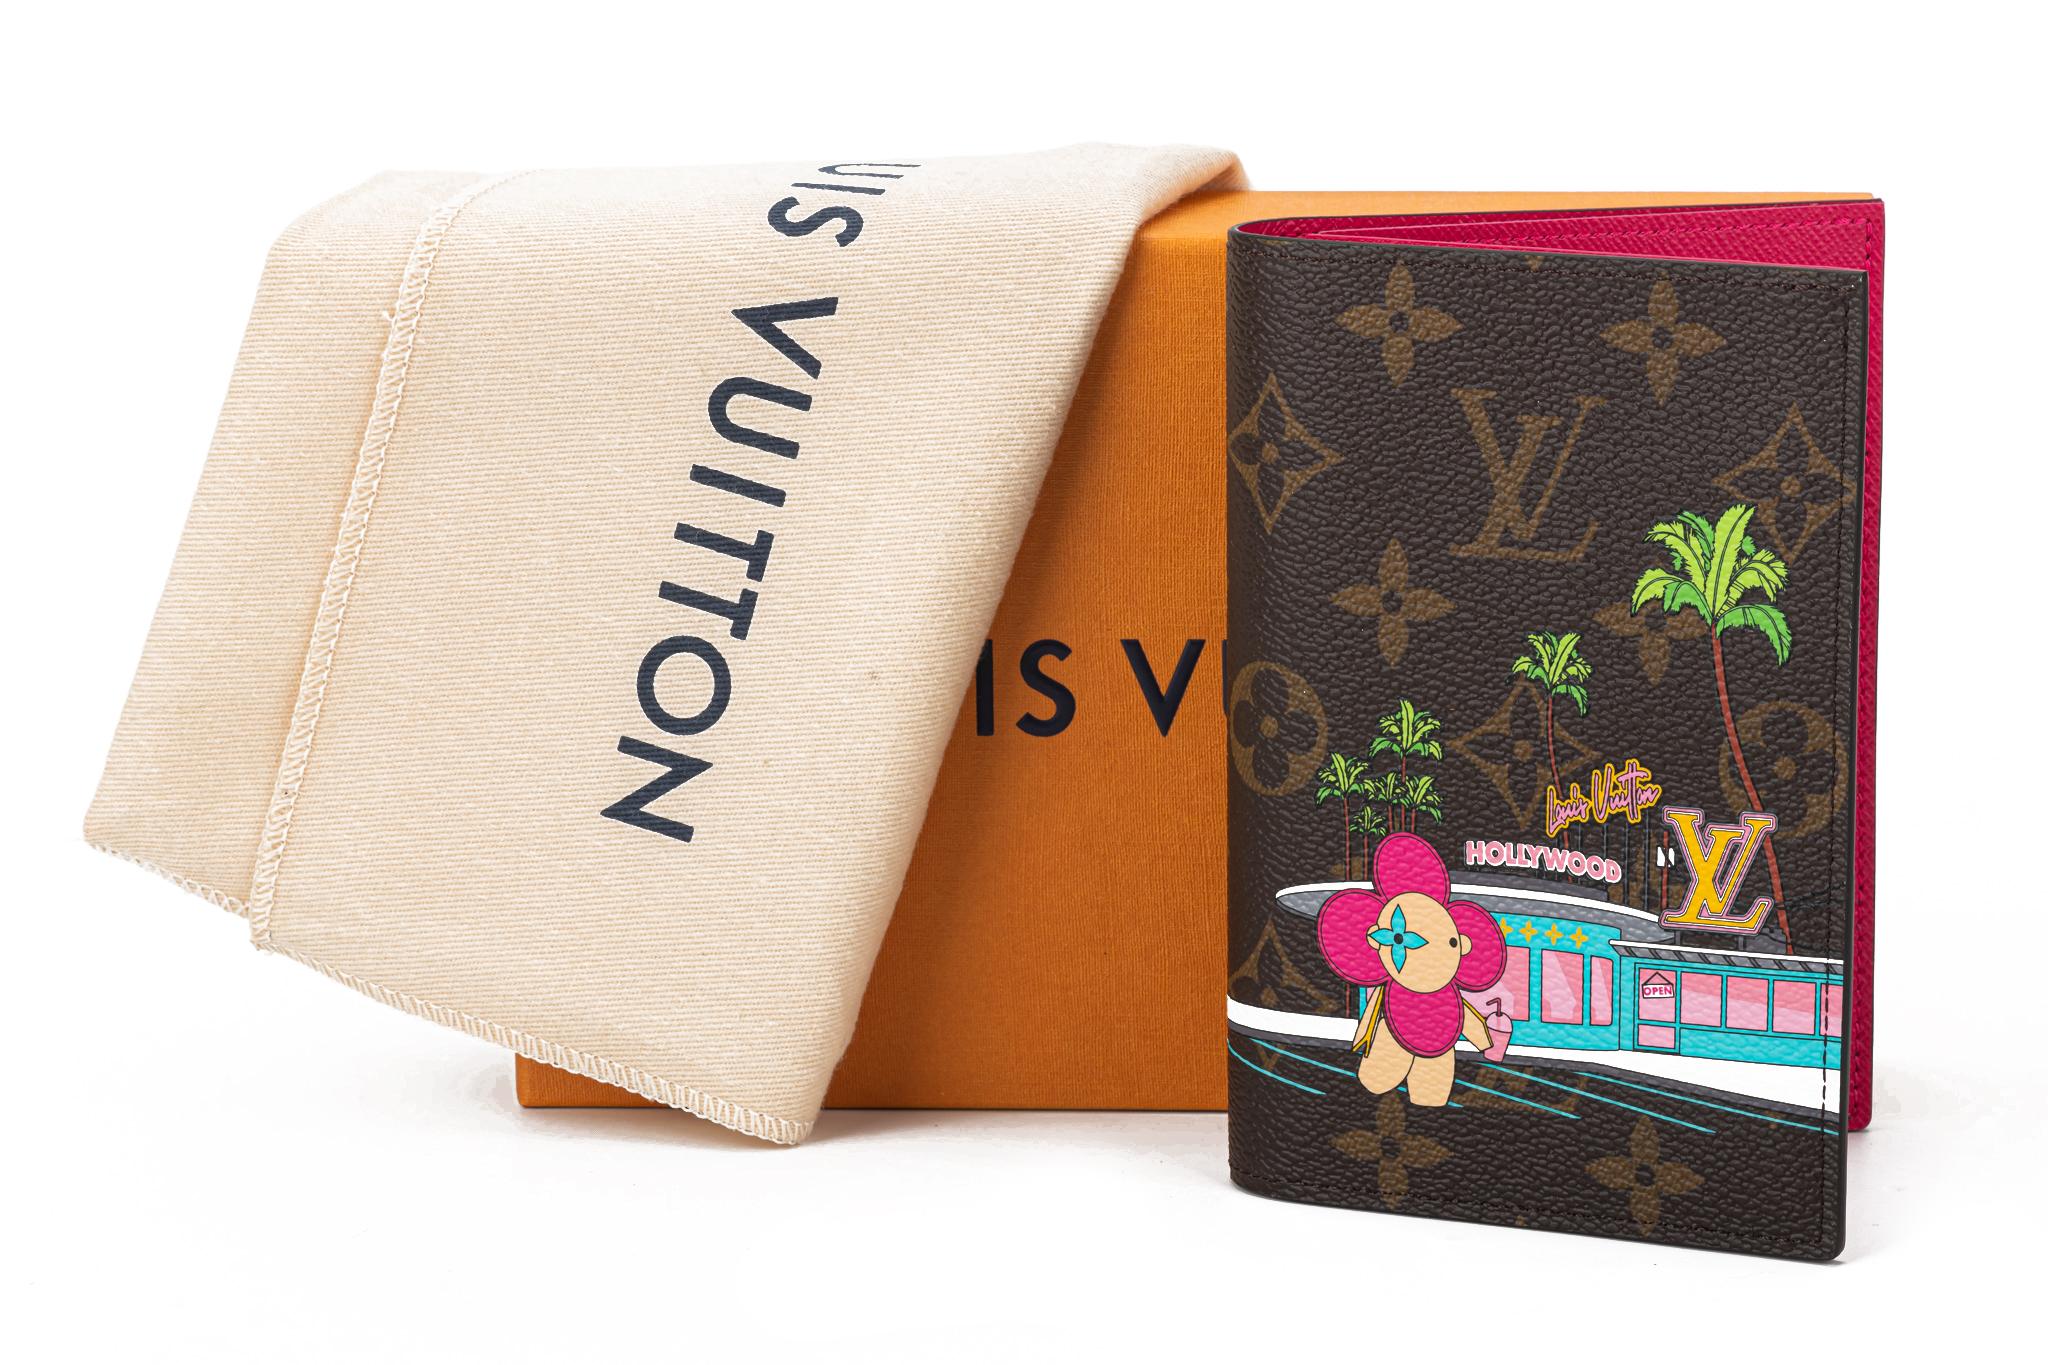 Louis Vuitton Passport Cover Hollywood XMAS Christmas 2021 Vivienne Monogram. The Passport Cover is made from Monogram canvas with a limited edition print of Vivienne, the Louis Vuitton mascot, on Hollywood Drive. The item is in excellent condition.